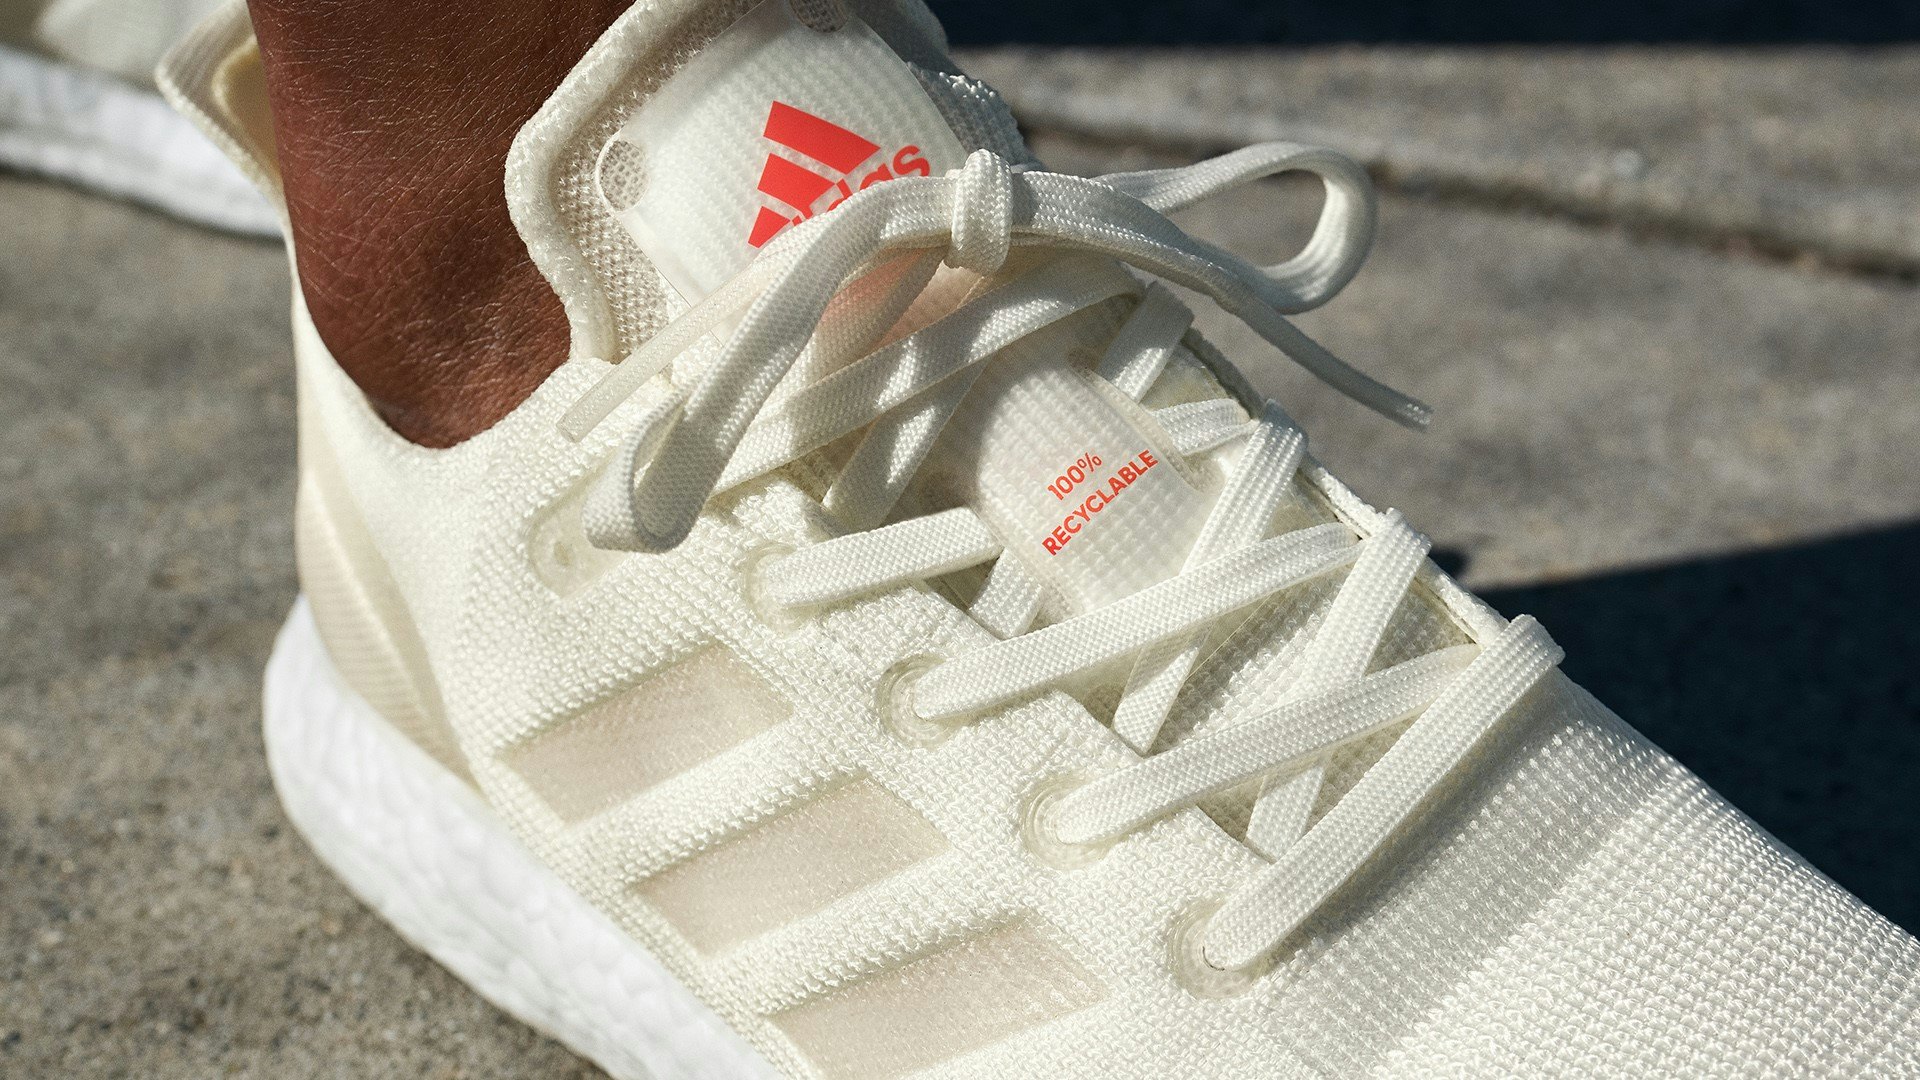 Adidas wants you to help test its recycled sneakers of the future